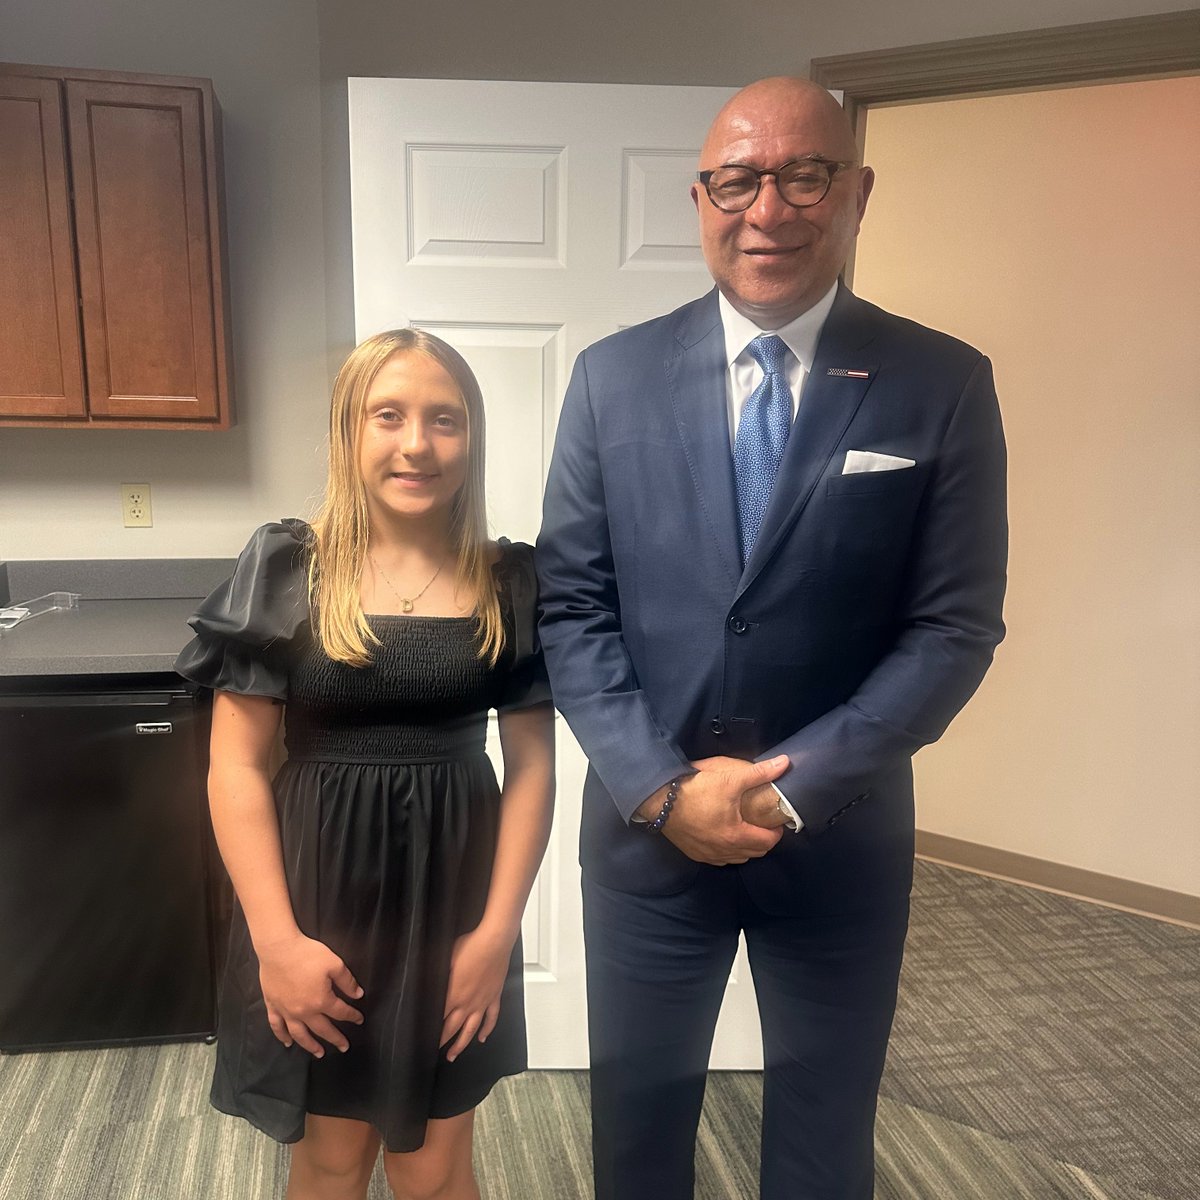 Sixth grader Daniella N met with @PAAuditorGen Timothy DeFoor yesterday. She learned about financial literacy education and was able to promote her own Junior Achievement platform. #SFLionPride